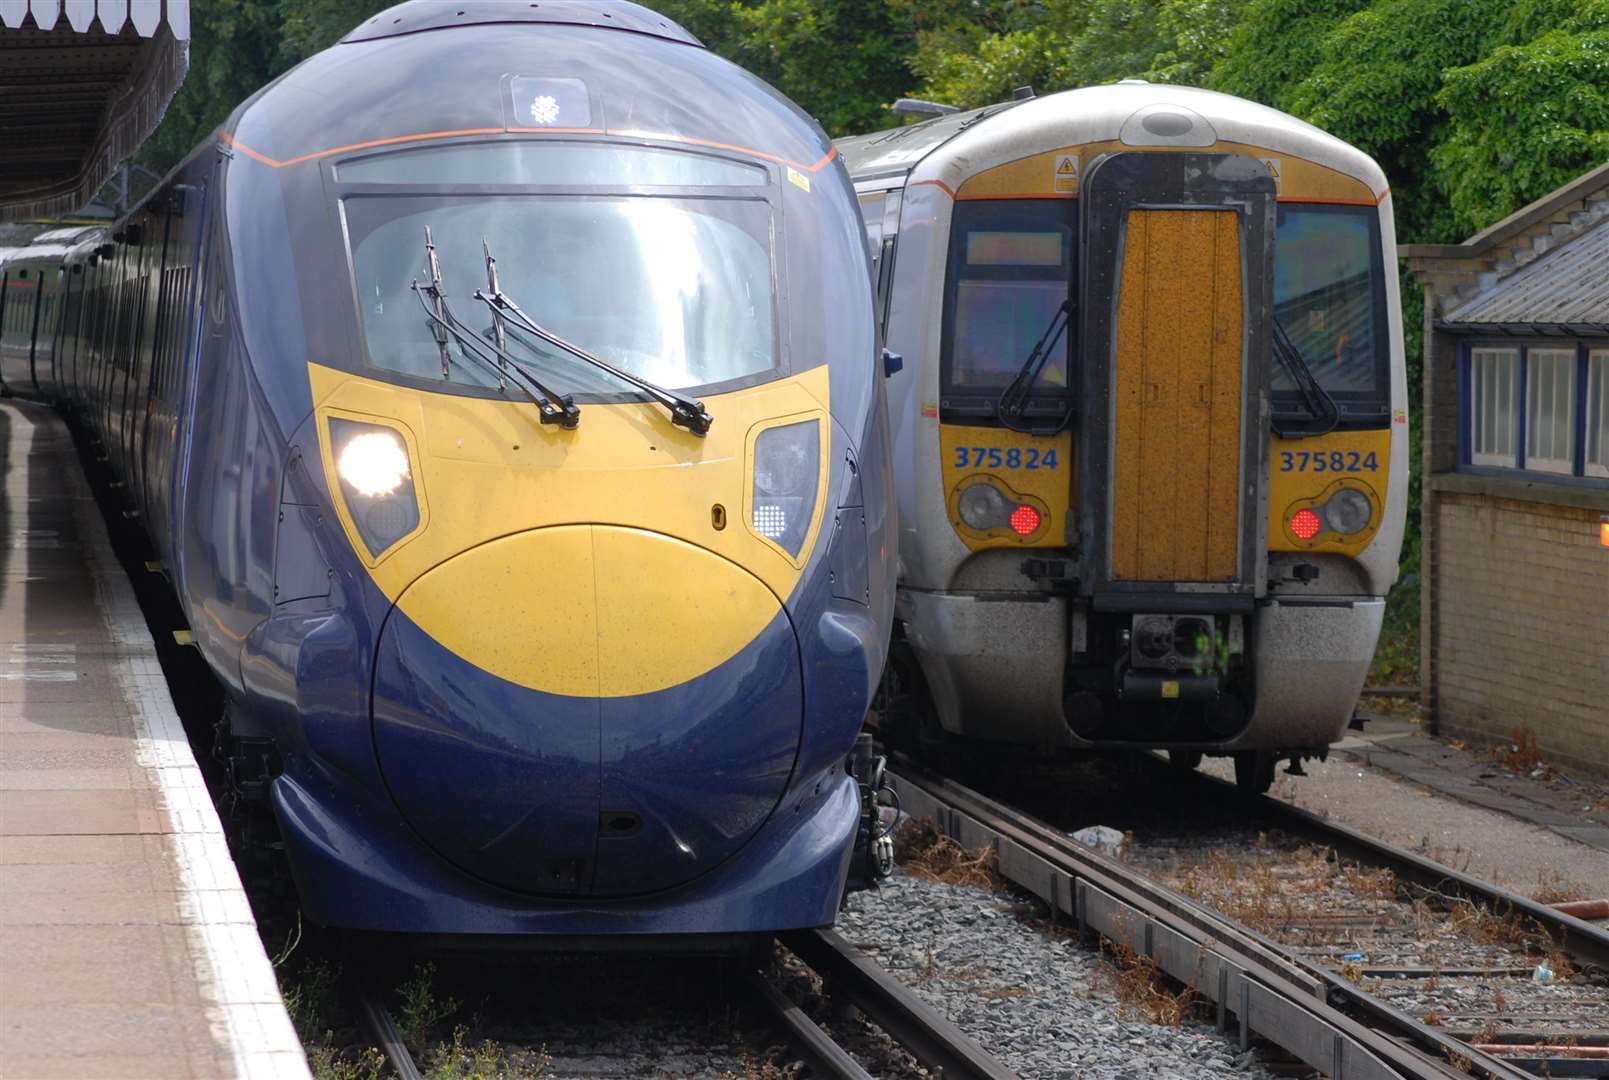 Southeastern will continue to run rail services in the county until April 2020